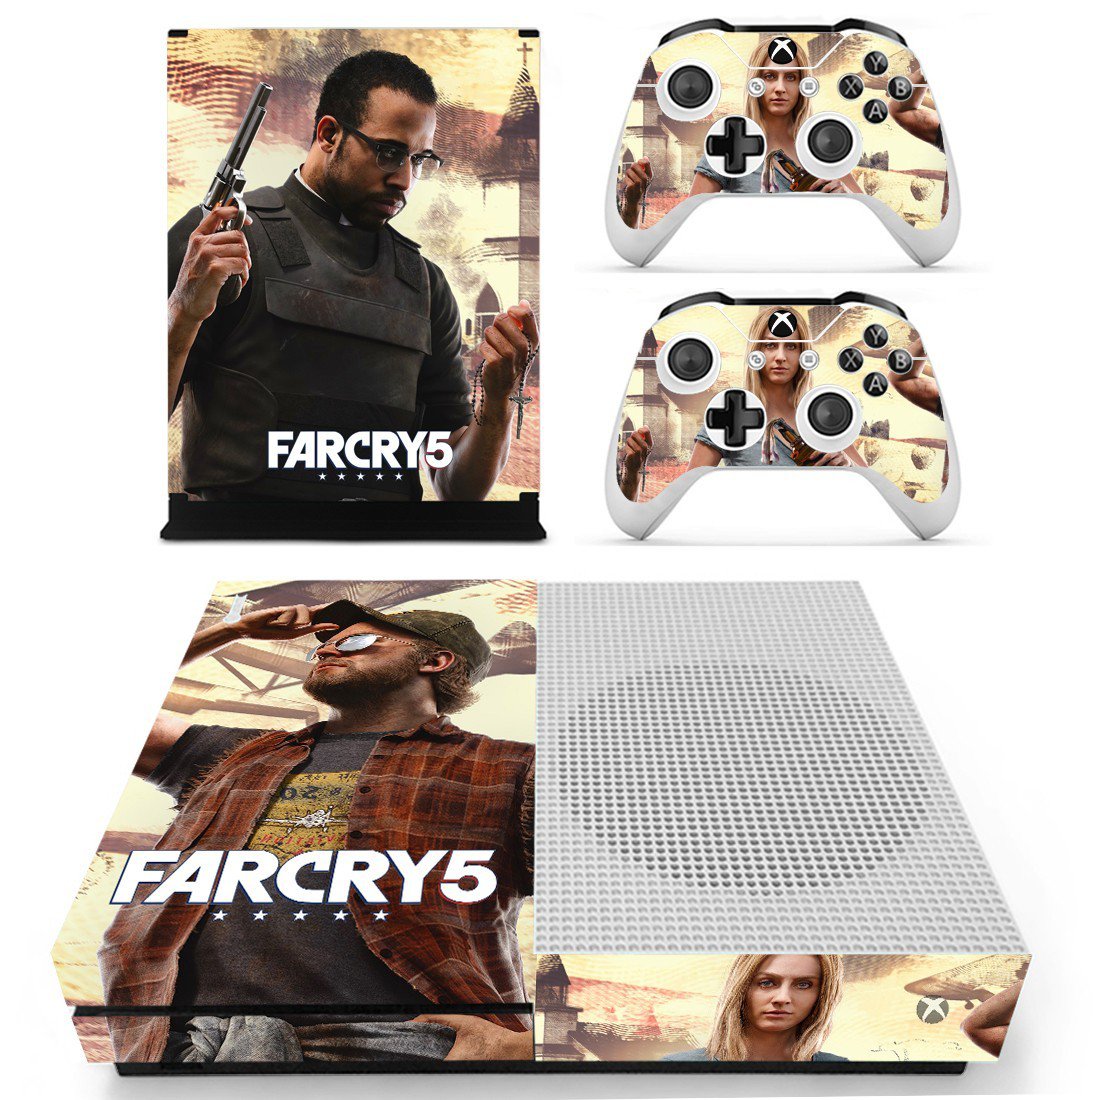 Far Cry 5 Sticker For Xbox One S And Controllers